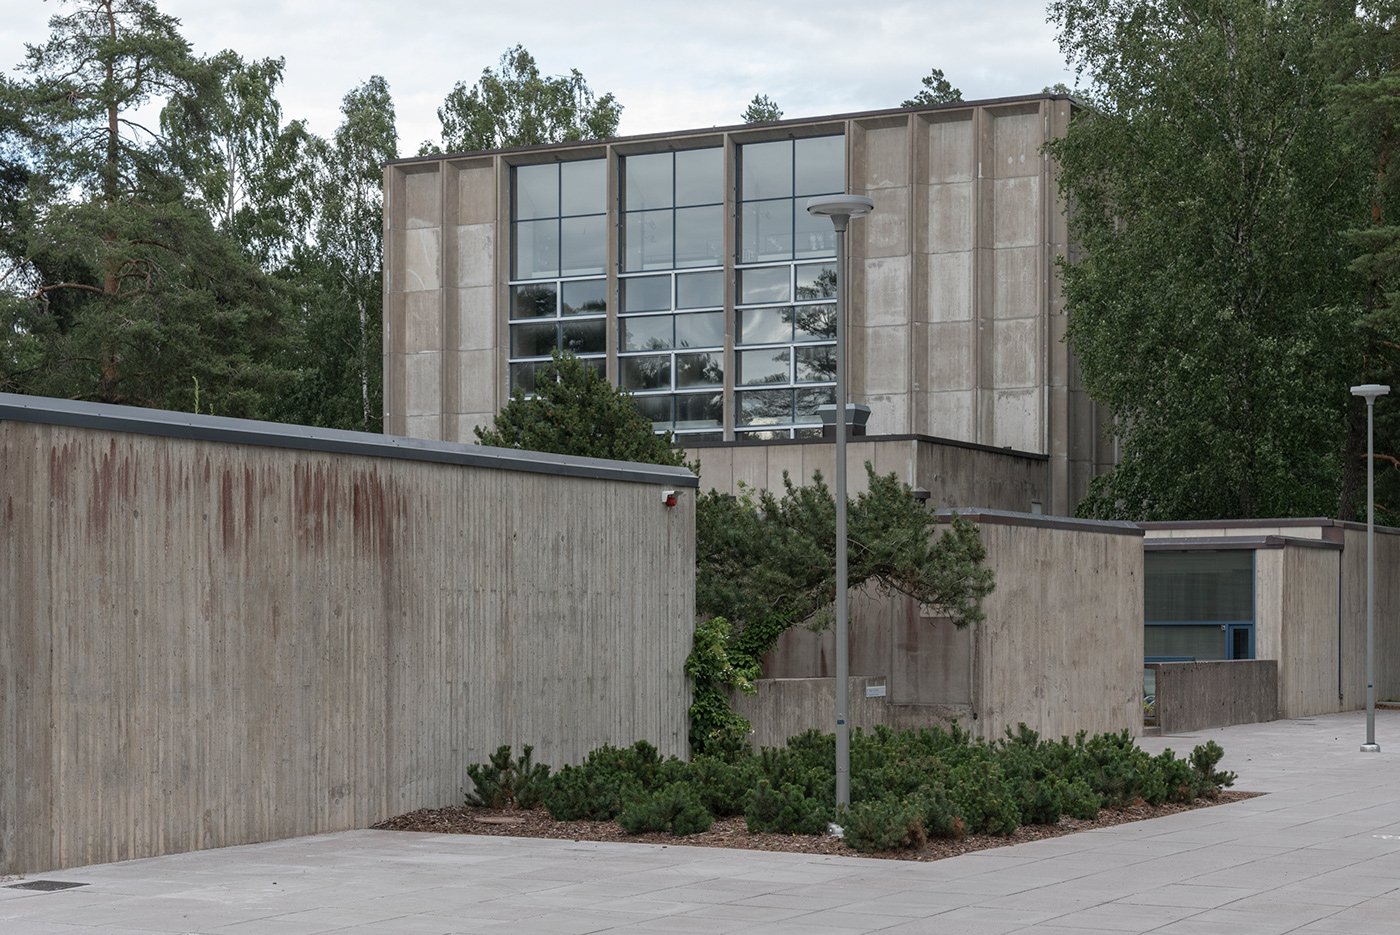 ArchDaily architectural architectural photography architecture beton Brutalism concrete finland modernism Tapiola